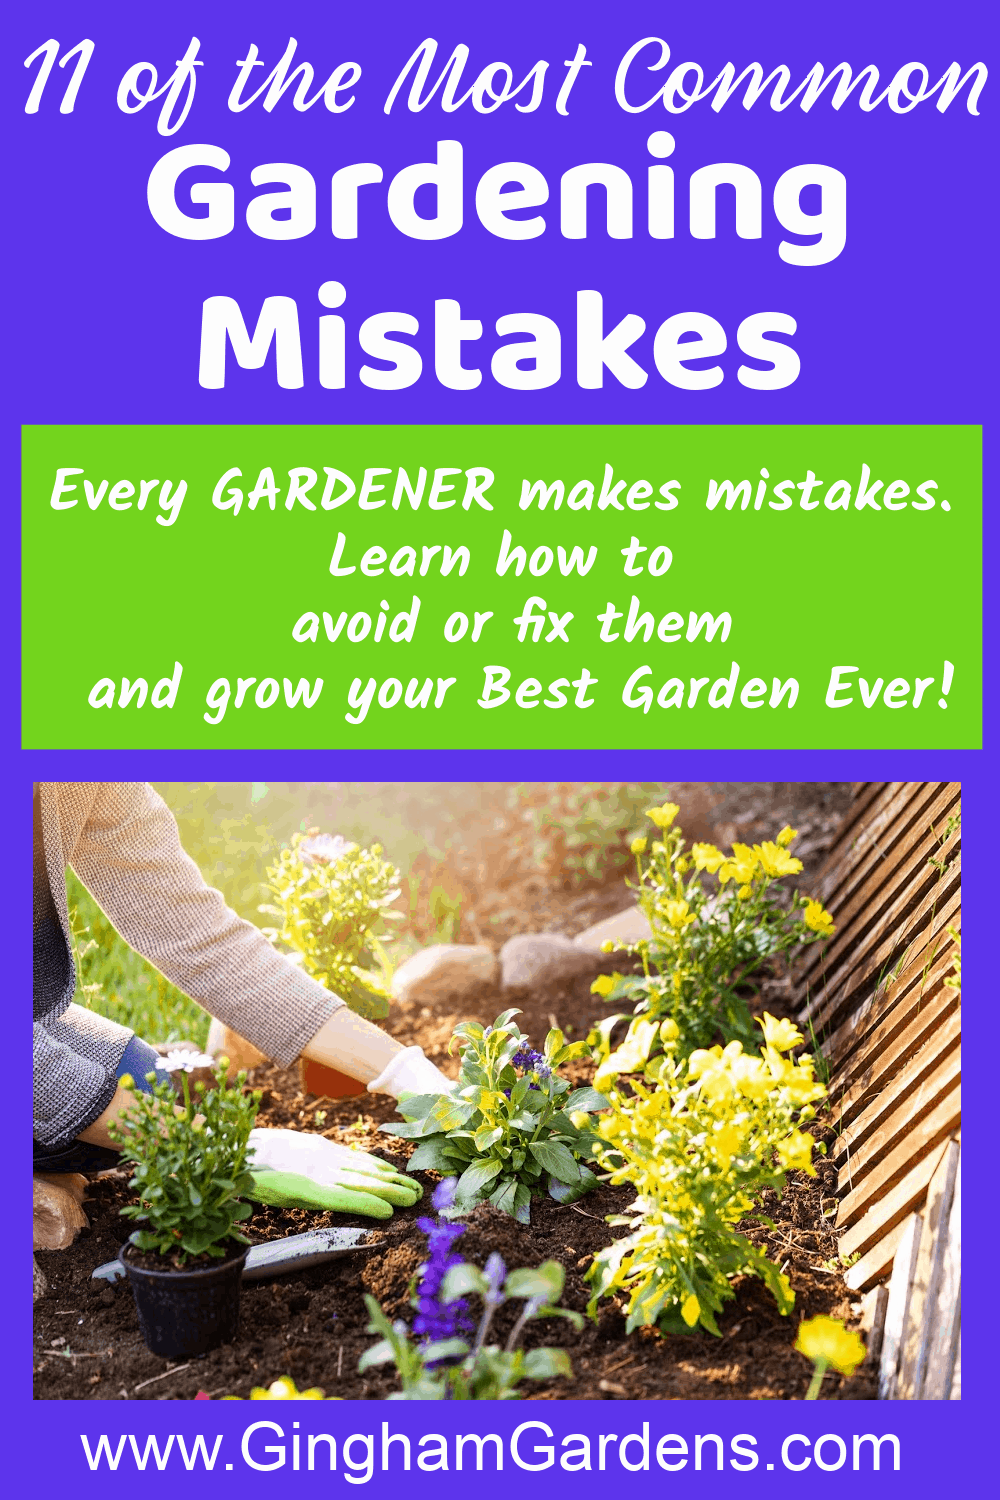 Image of a Gardener with text overlay - 11 of the most common Gardening Mistakes